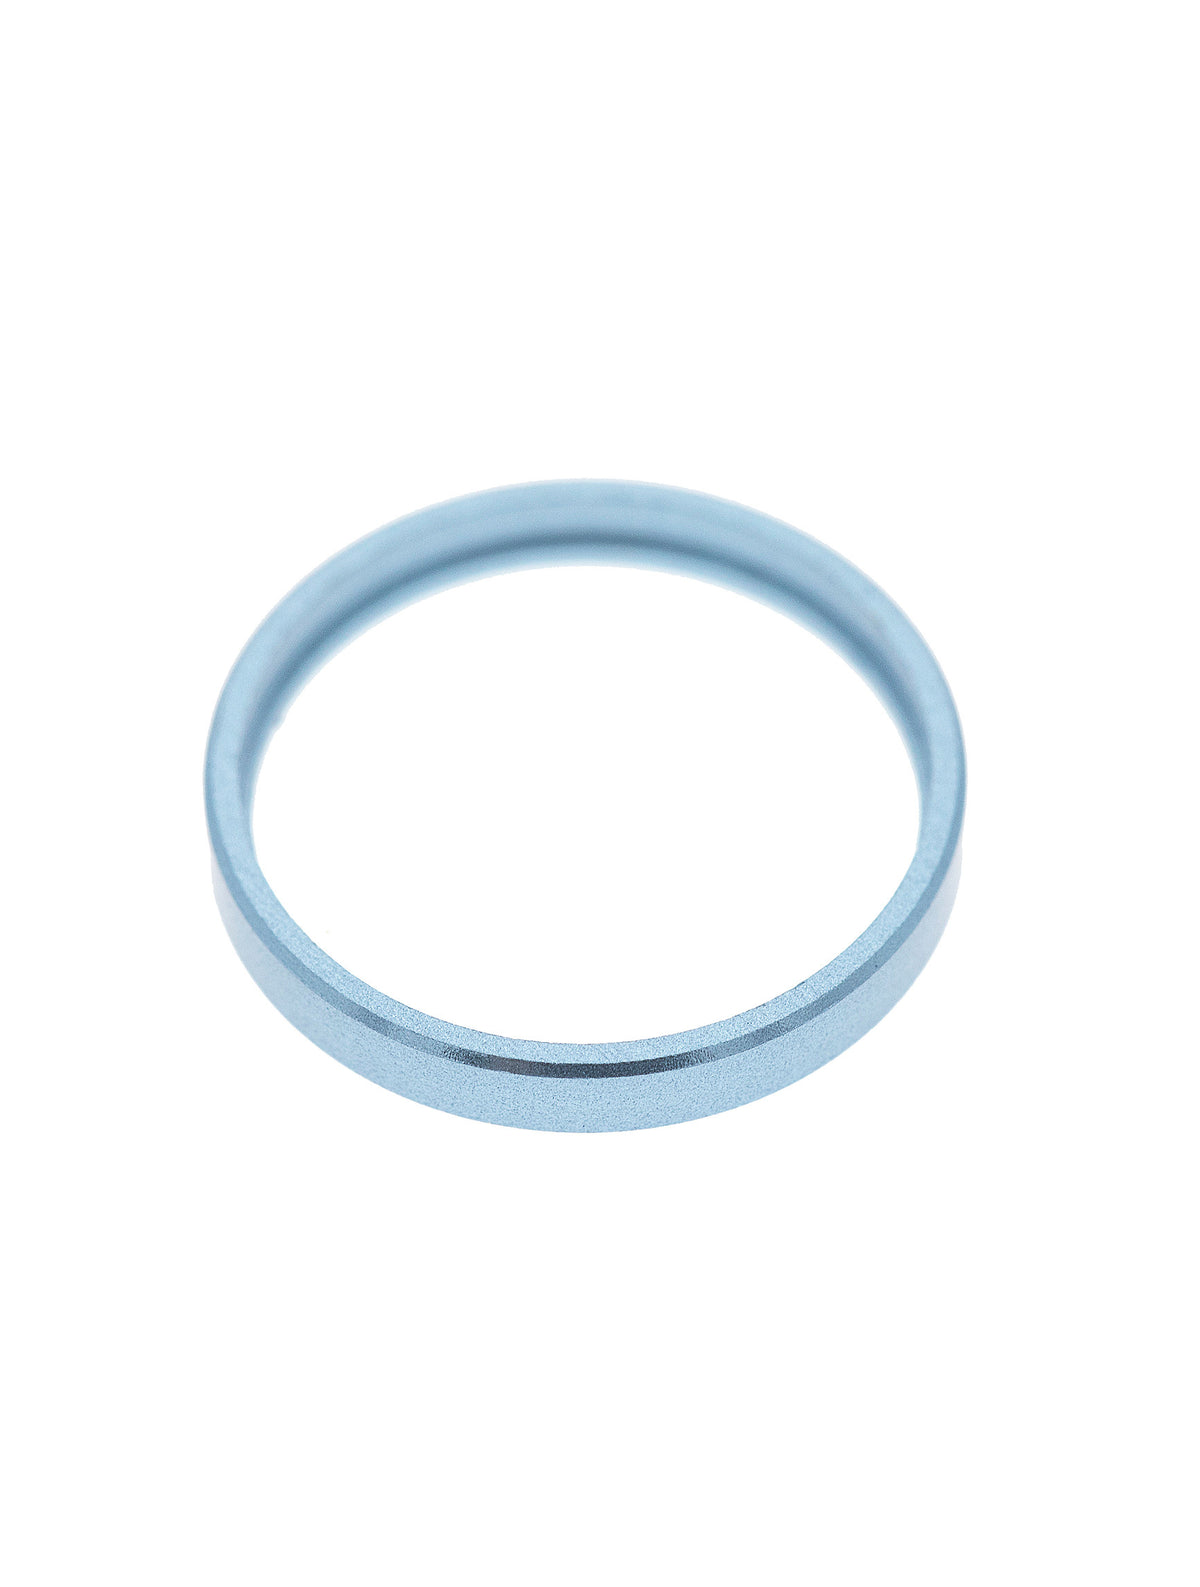 BLUE BACK CAMERA BEZEL RING ONLY (10 PACK) COMPATIBLE FOR IPHONE XR